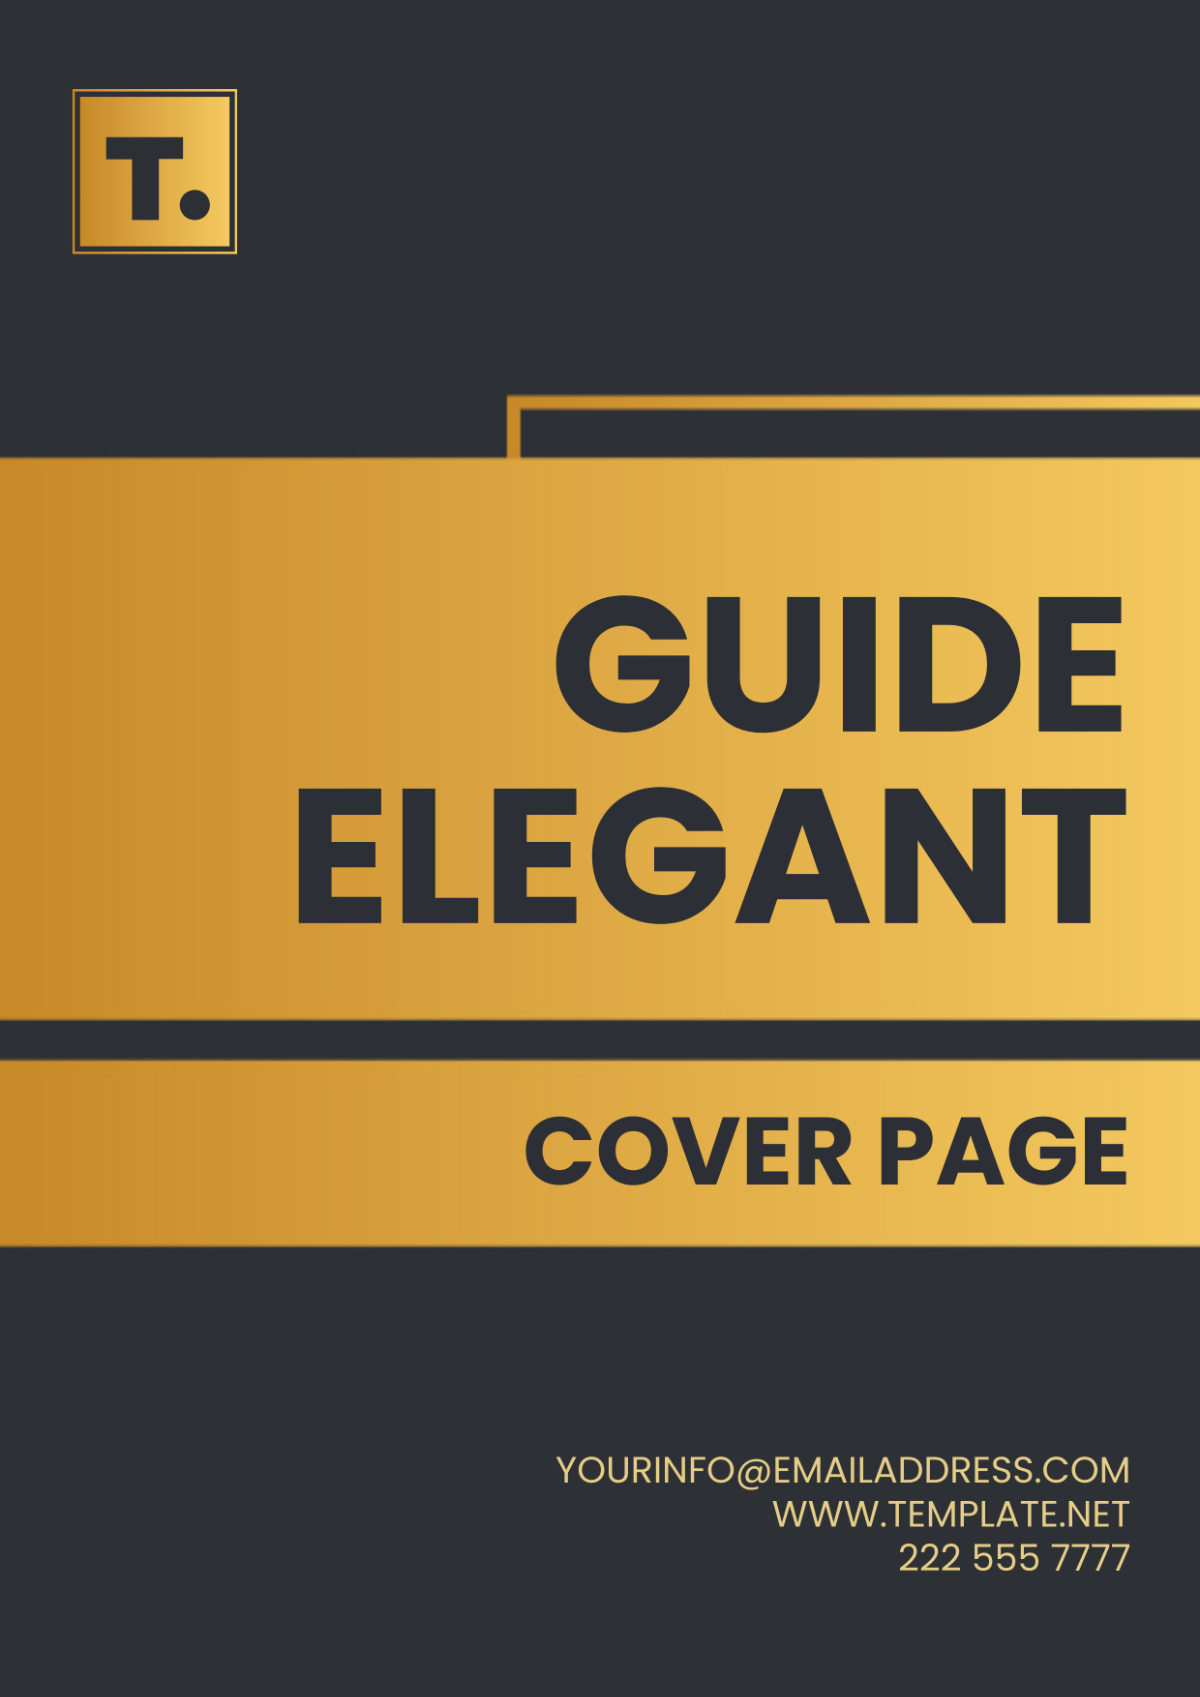 Guide Elegant Cover Page Template